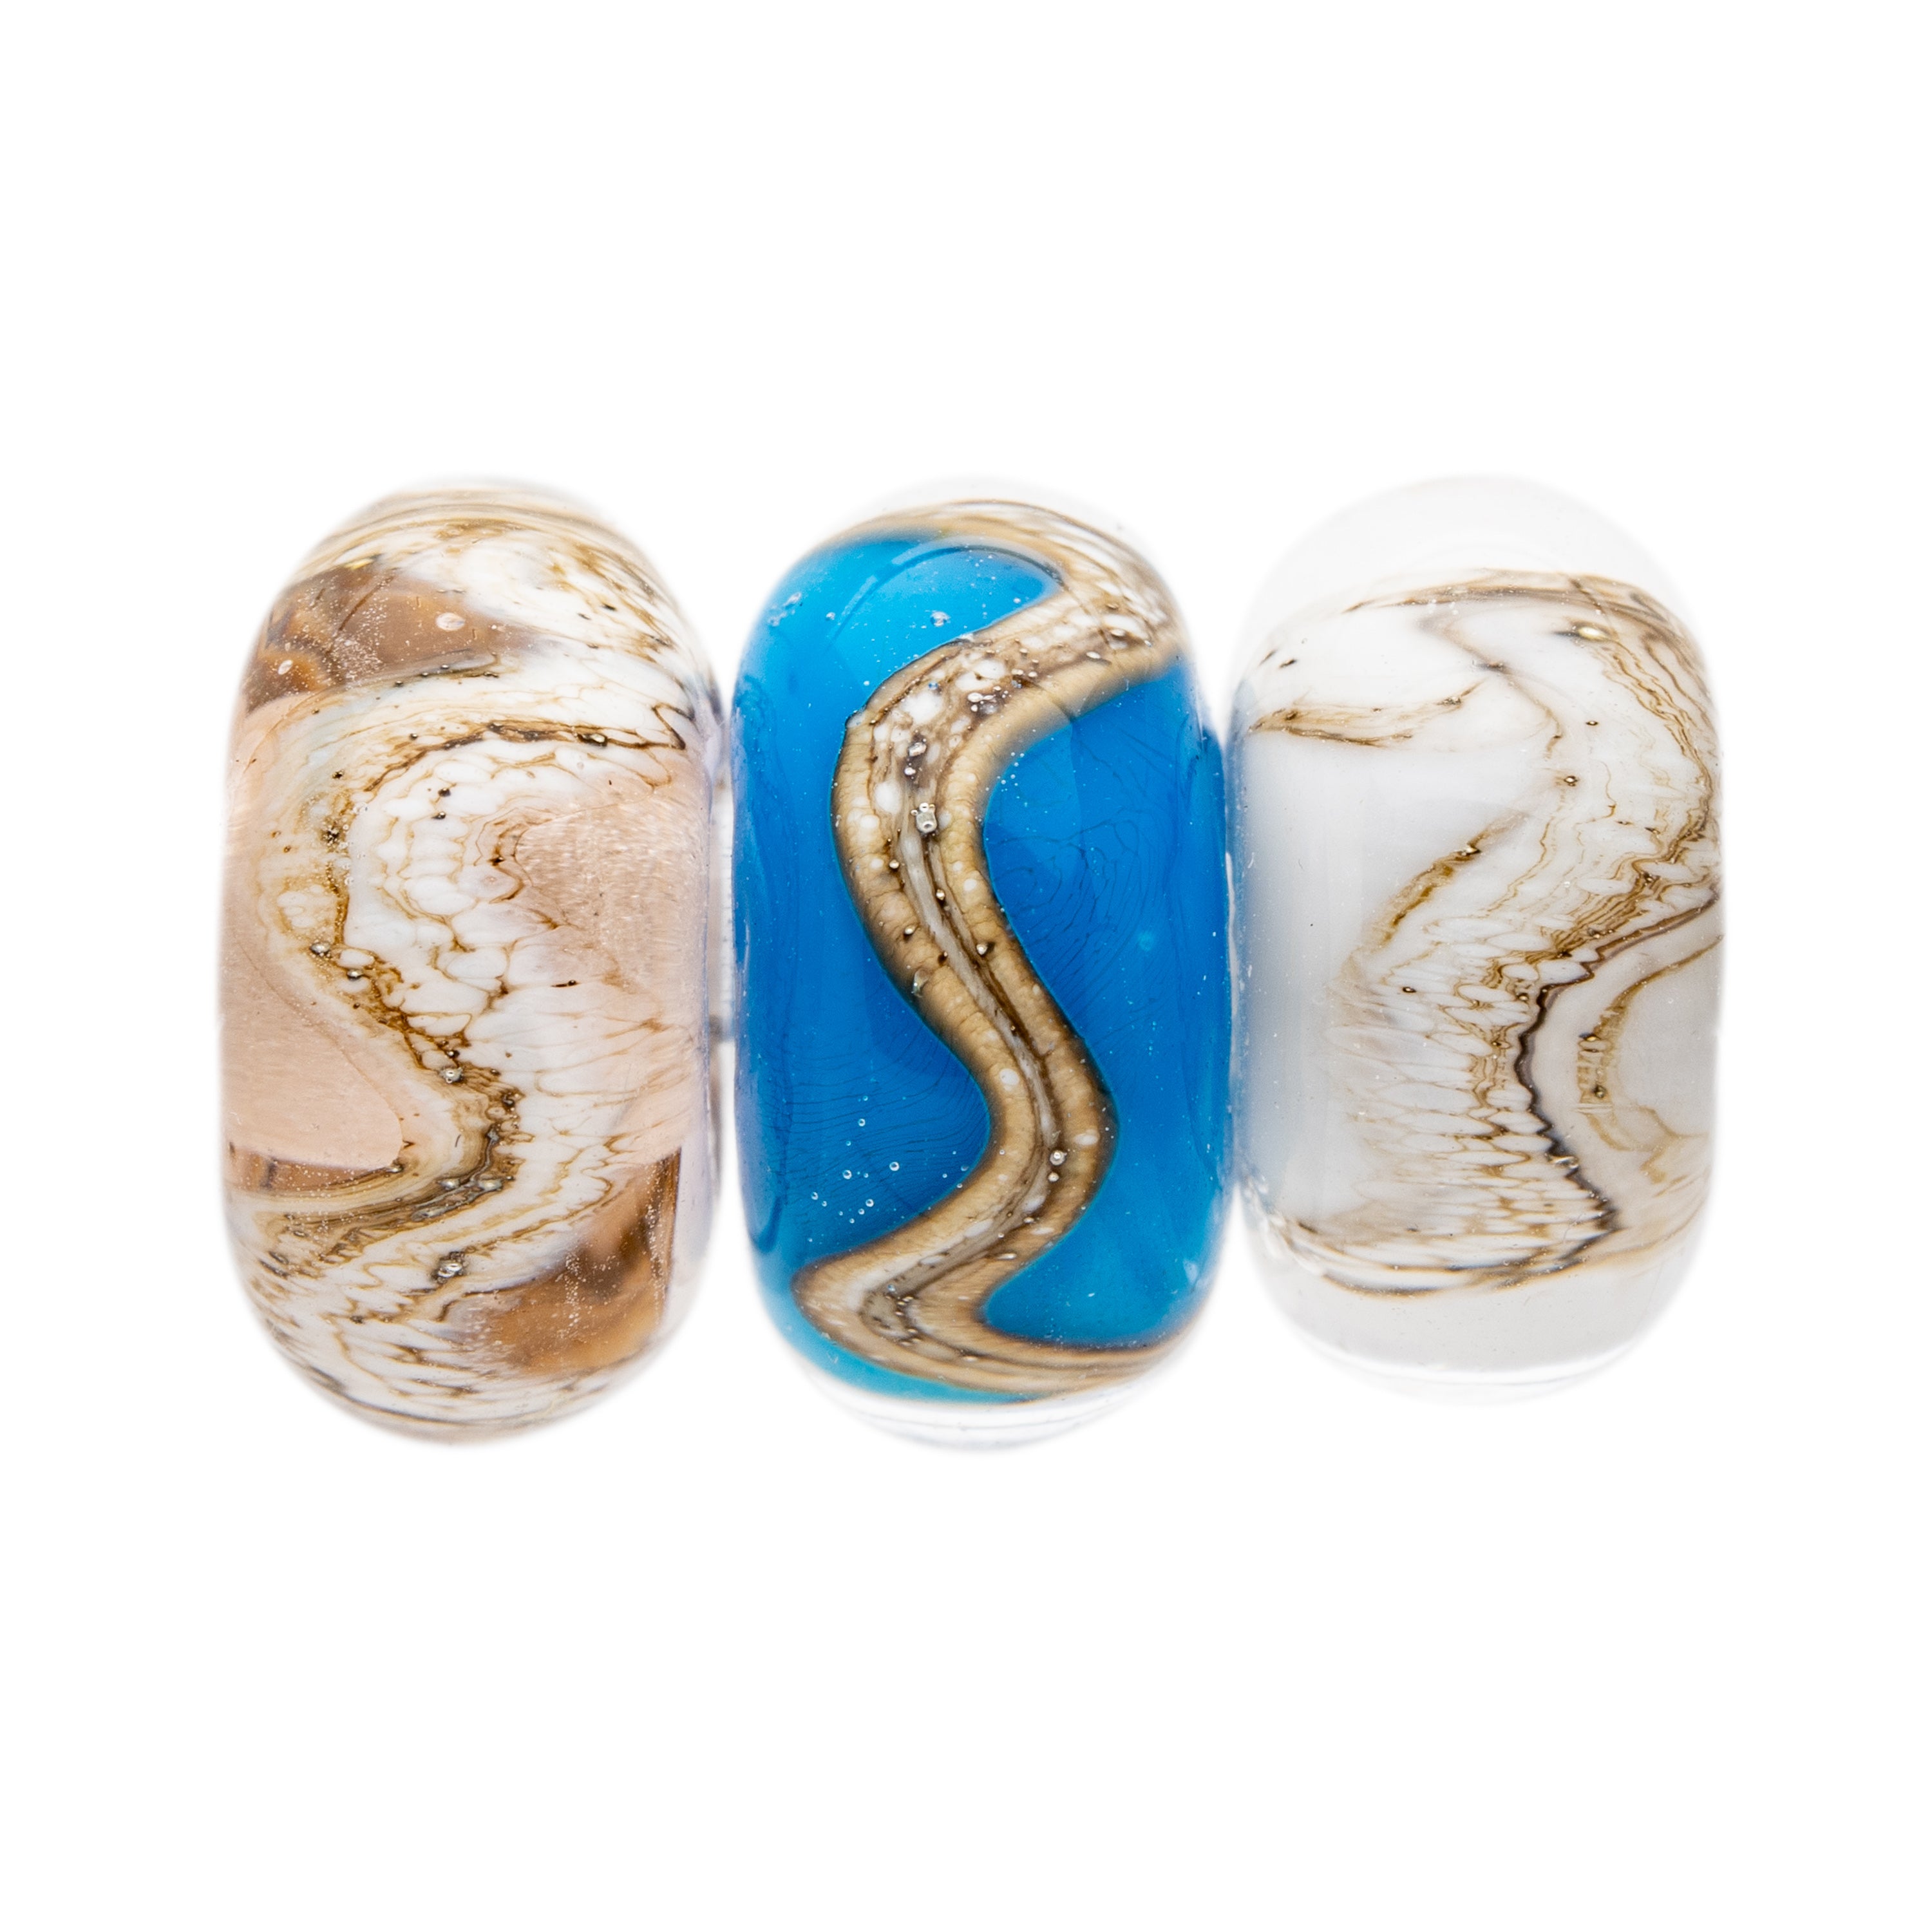 Peach, White and Blue Turquoise, white and orange glass beads wrapped with swirling silver sand pattern, representing the Northumberland Coastline.